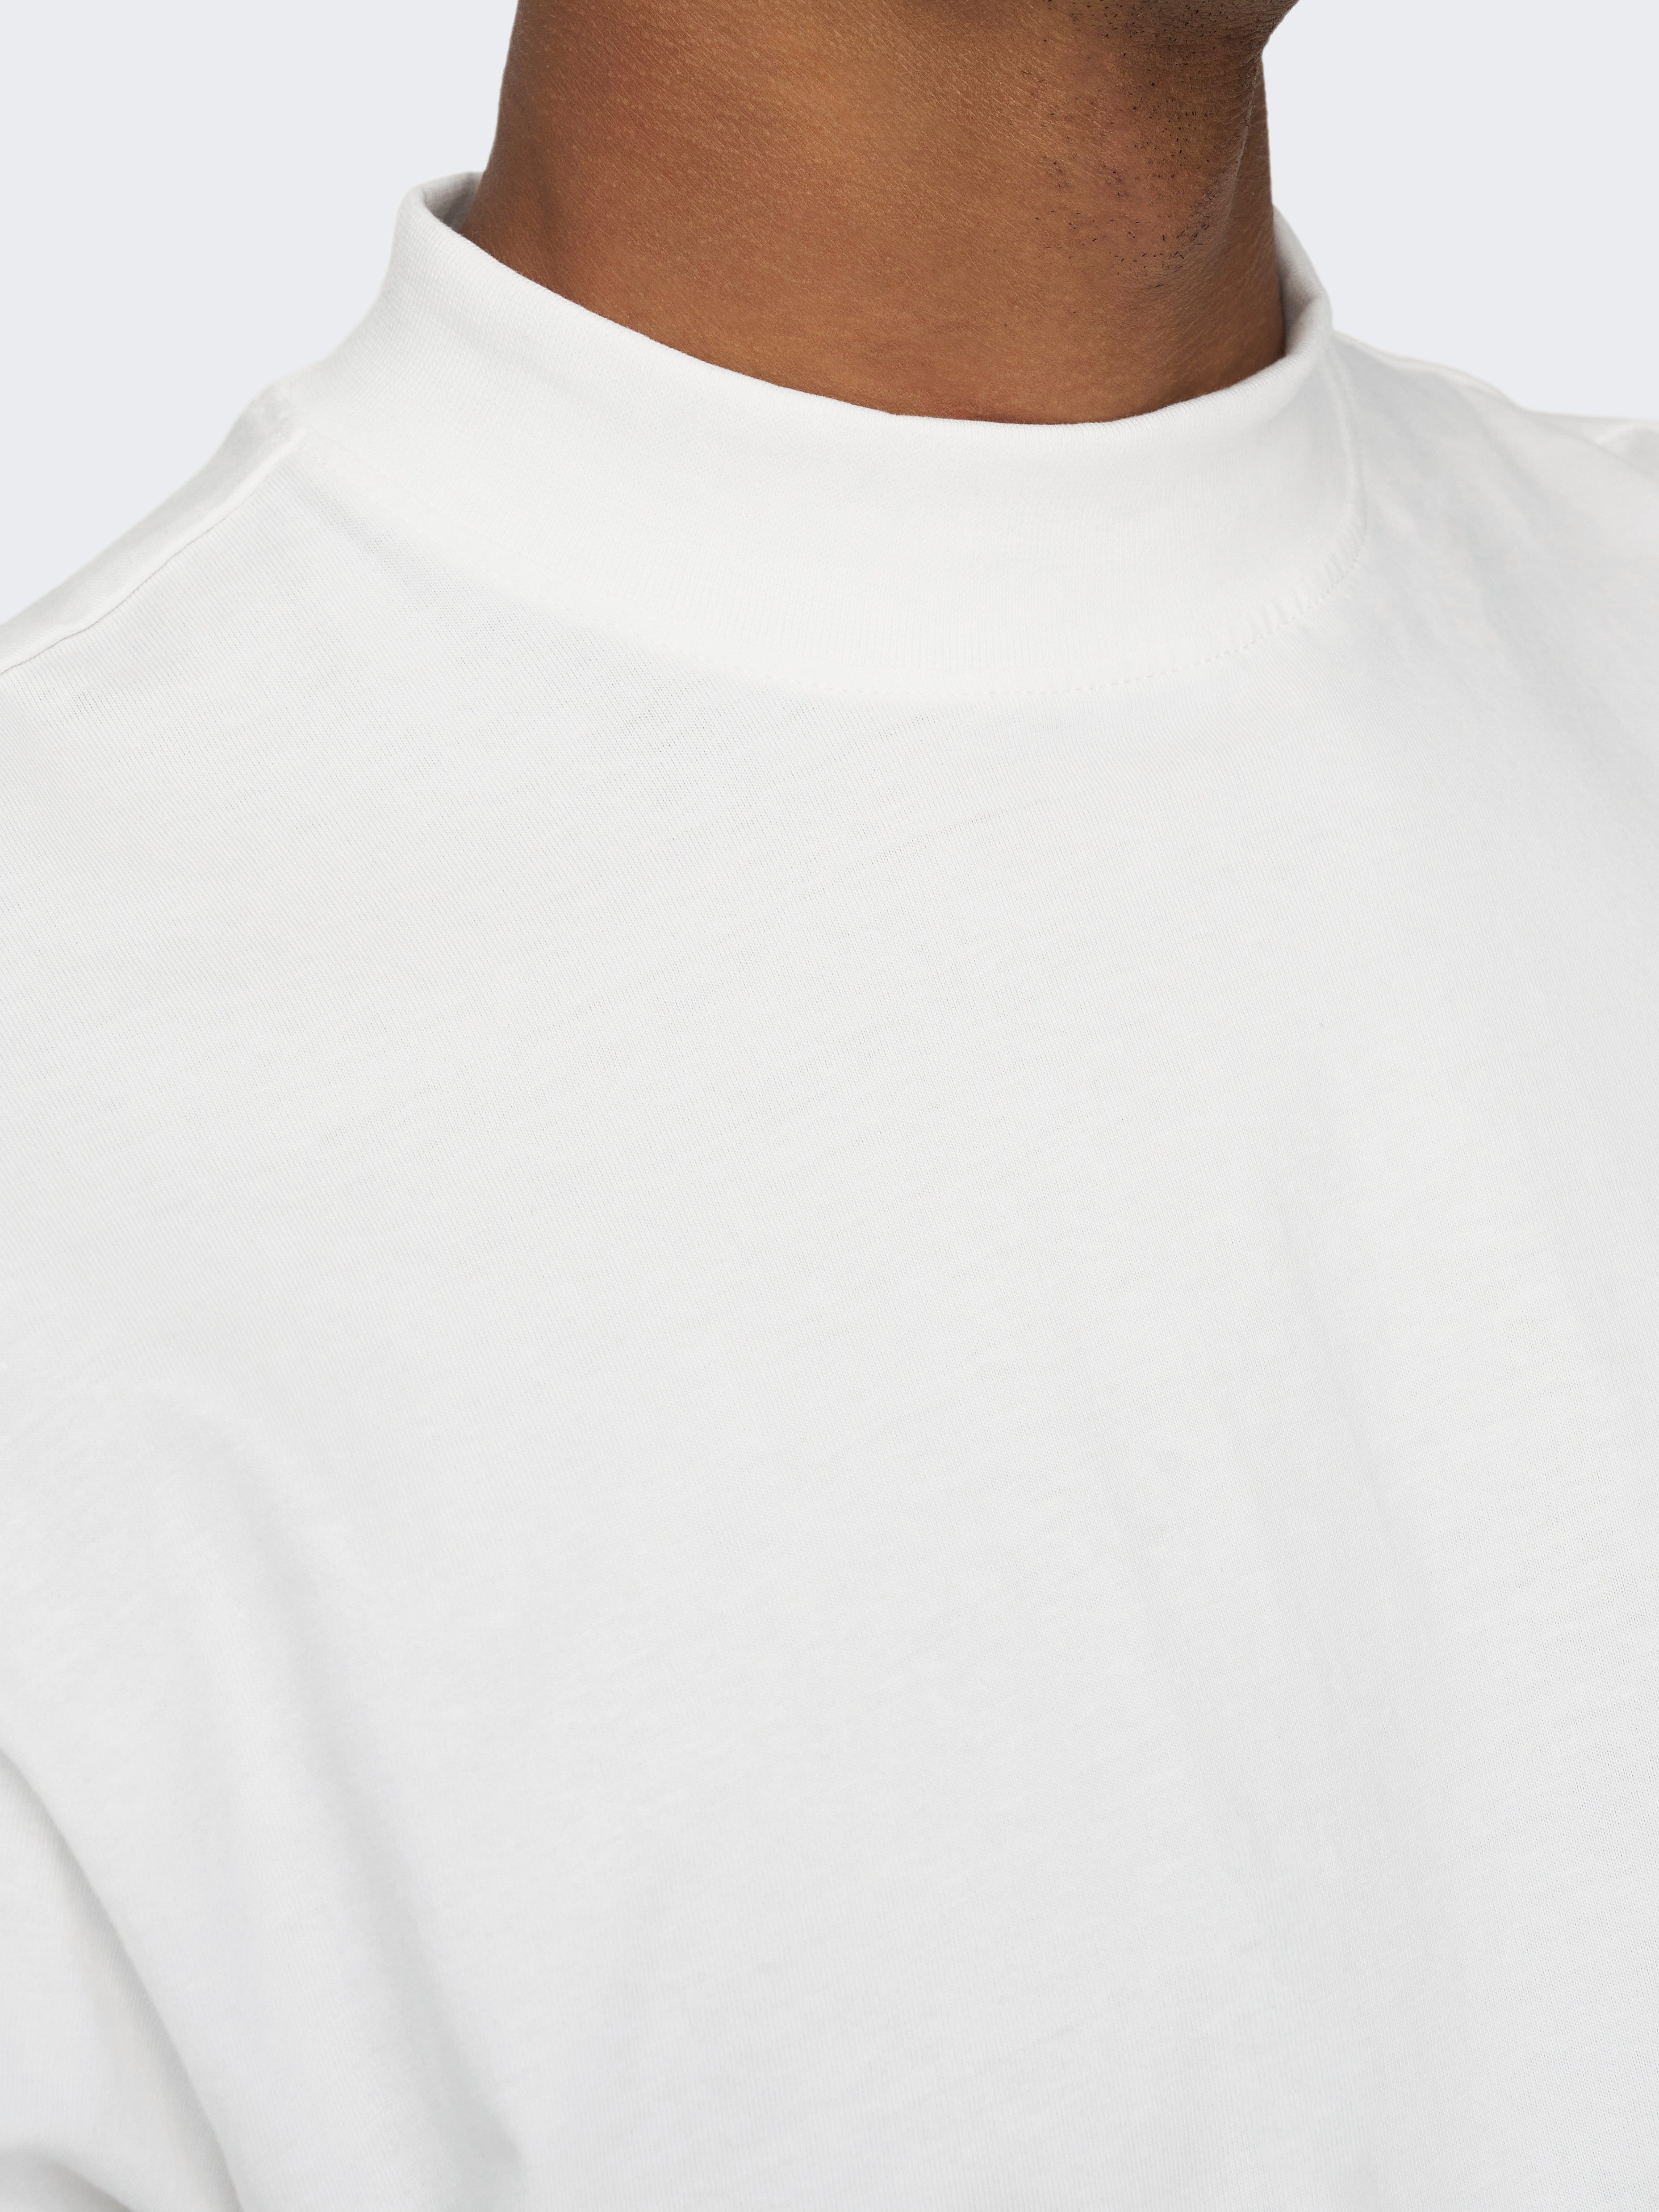 Relaxed Fit Mock neck T-Shirt